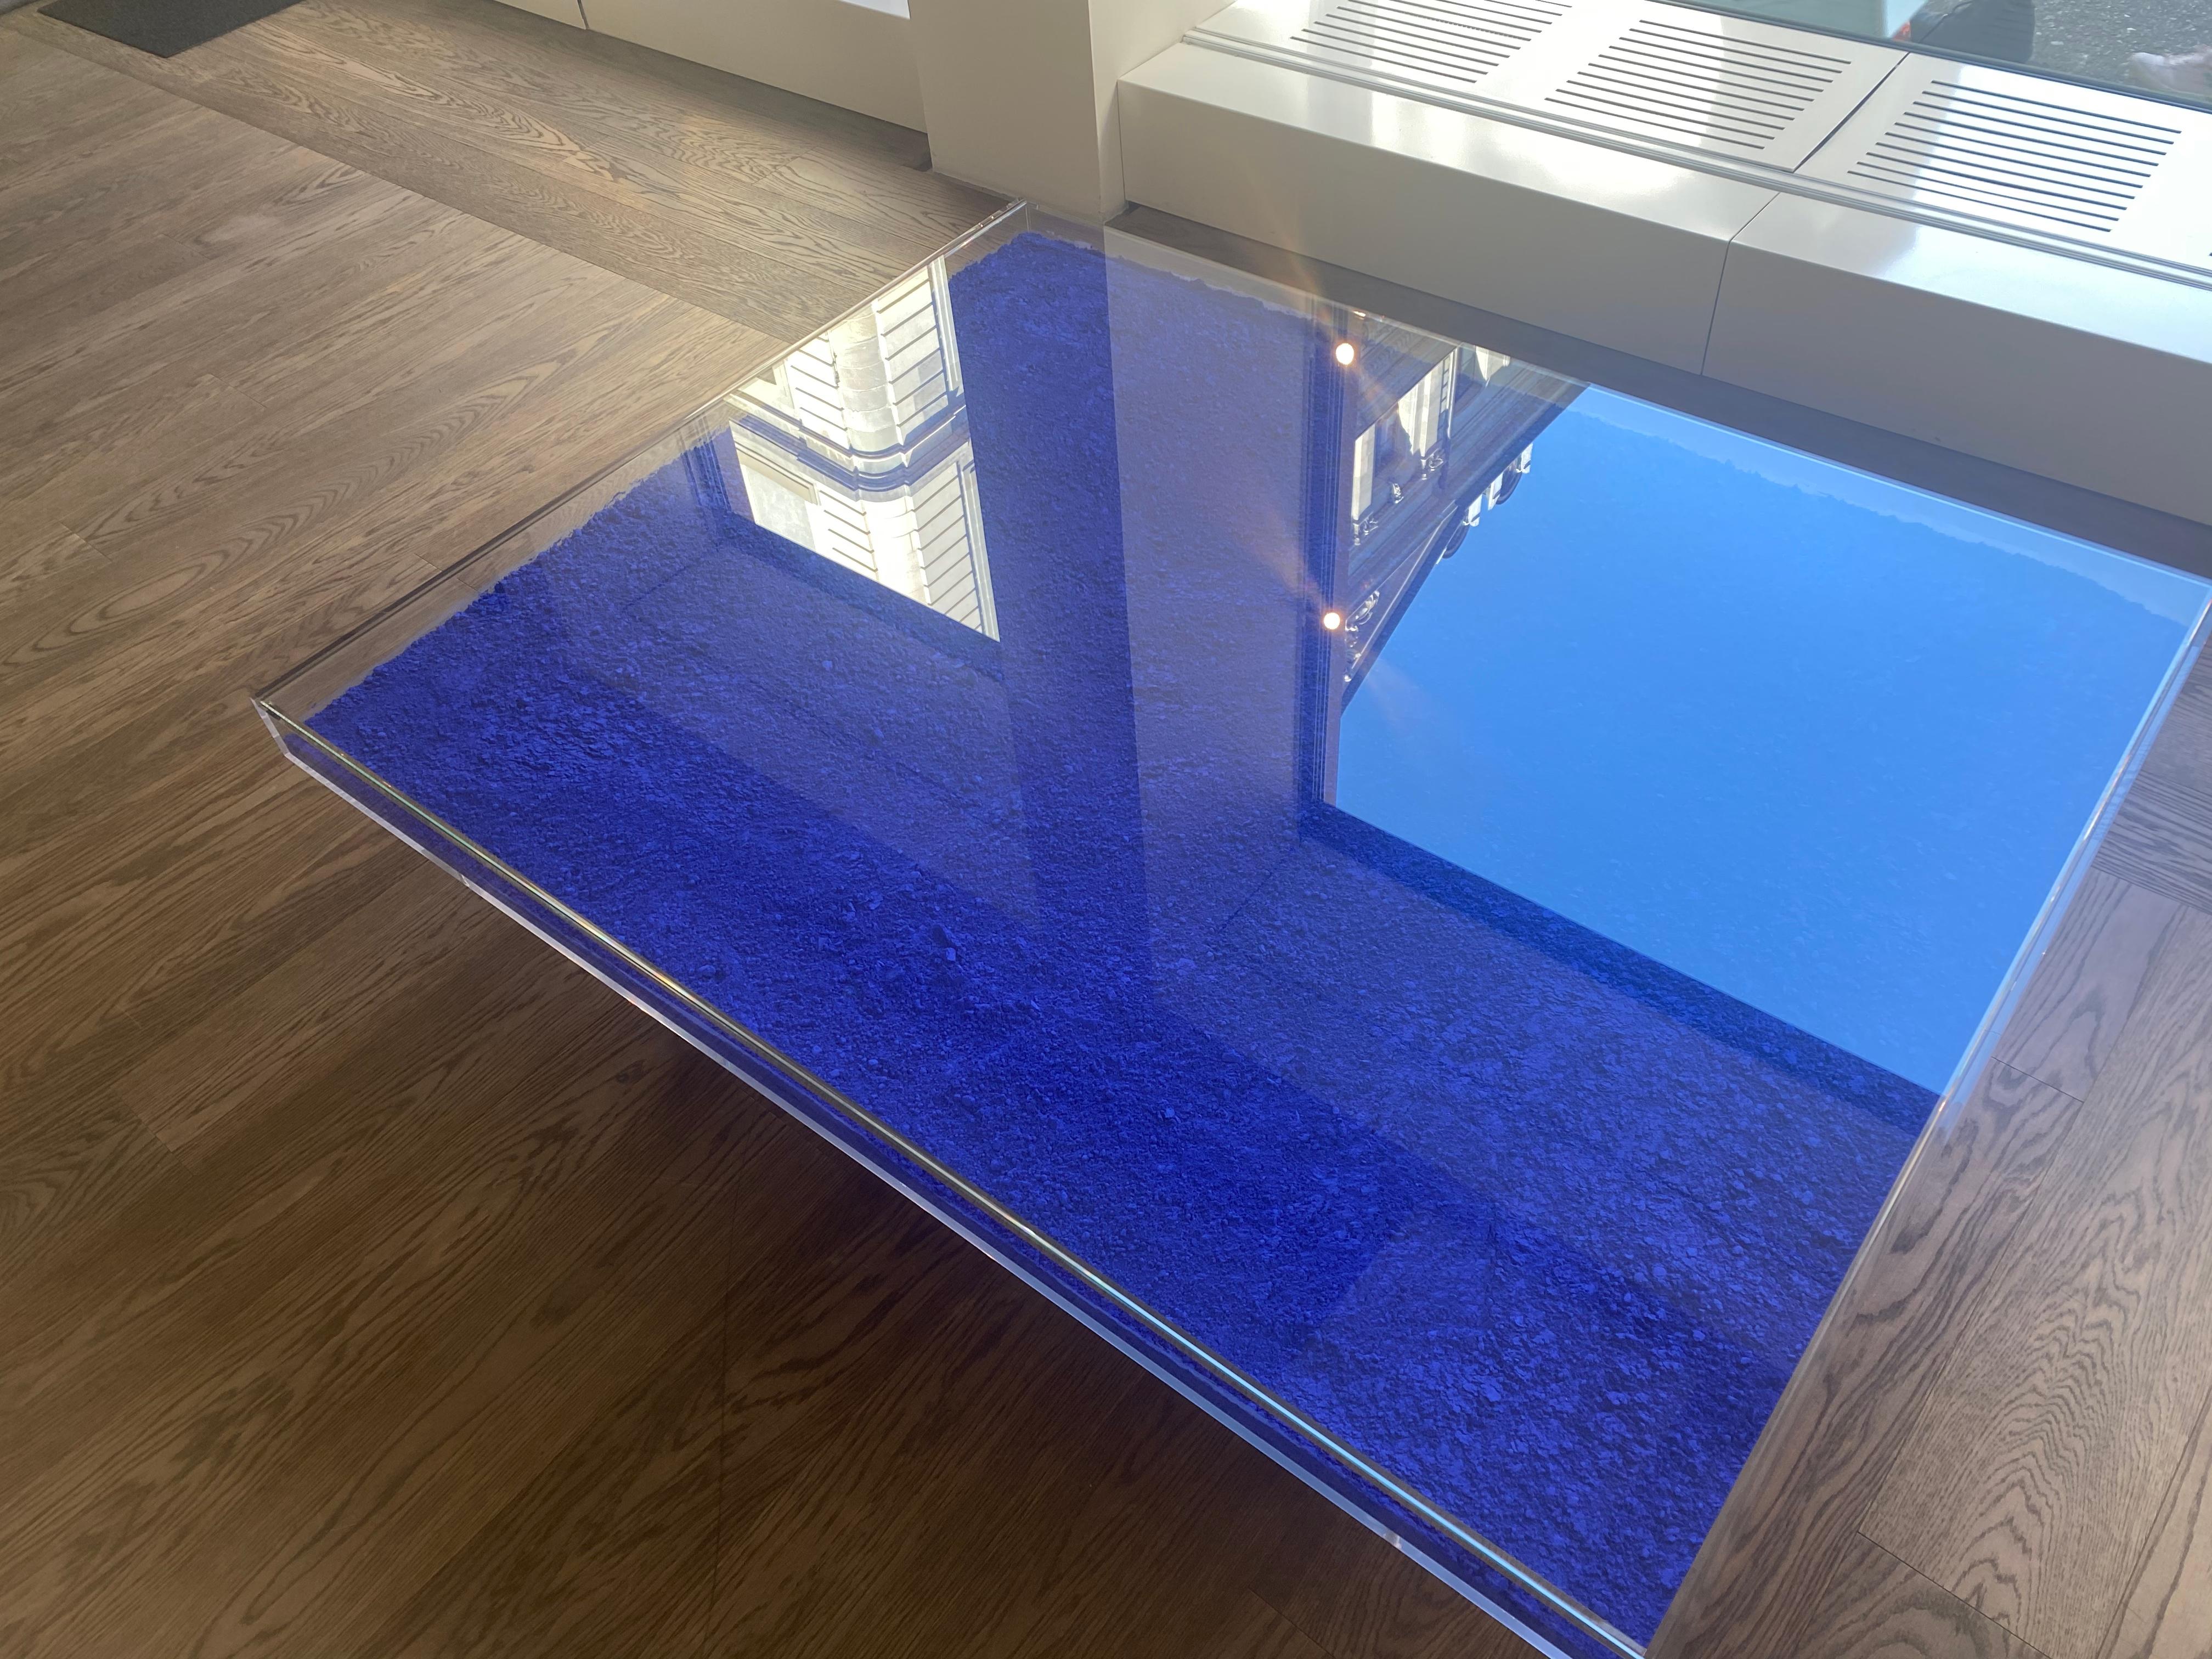 Table Bleu Klein IKB, Yves Klein, Blue pigment glass table, Contemporary, Design

2019
Blue pigment in glass, plexiglass and chrome plated metal
Plate numbered and signed underside : JHY-OIKA / R. Klein-Moquay
ID Code : KLEIYV-40748

Probably best